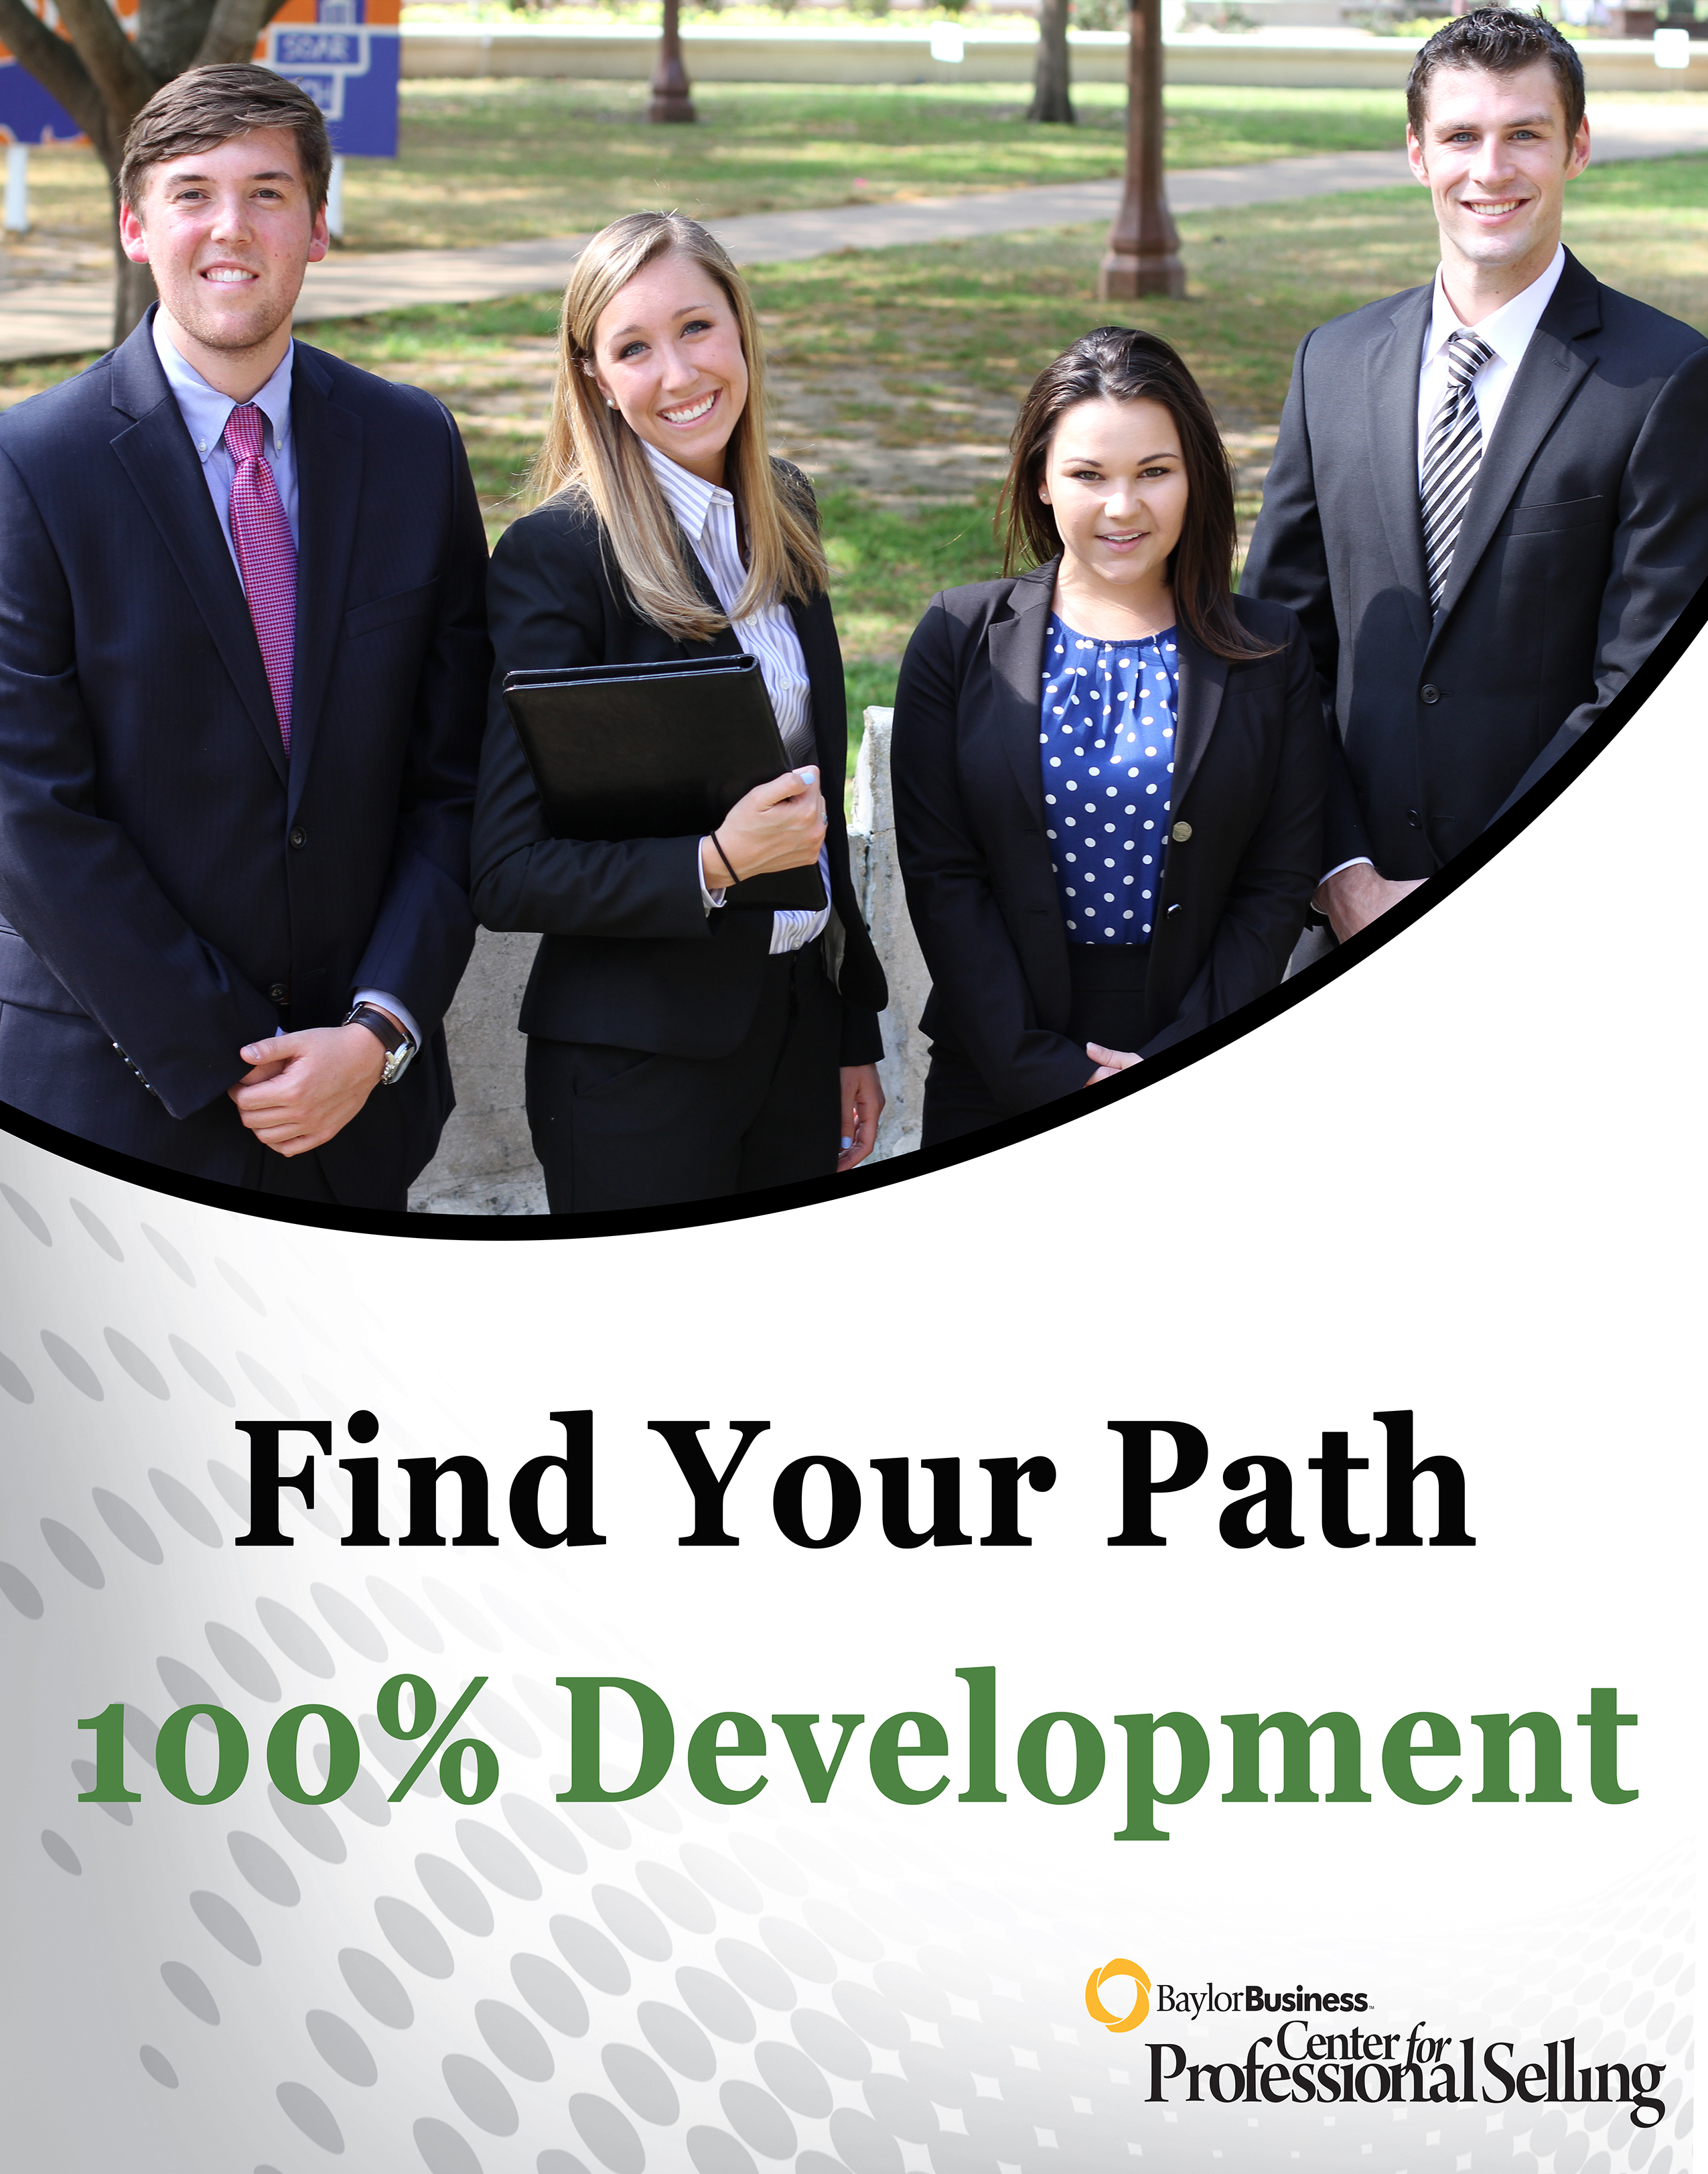 Find Your Path 100% Development Ad 1